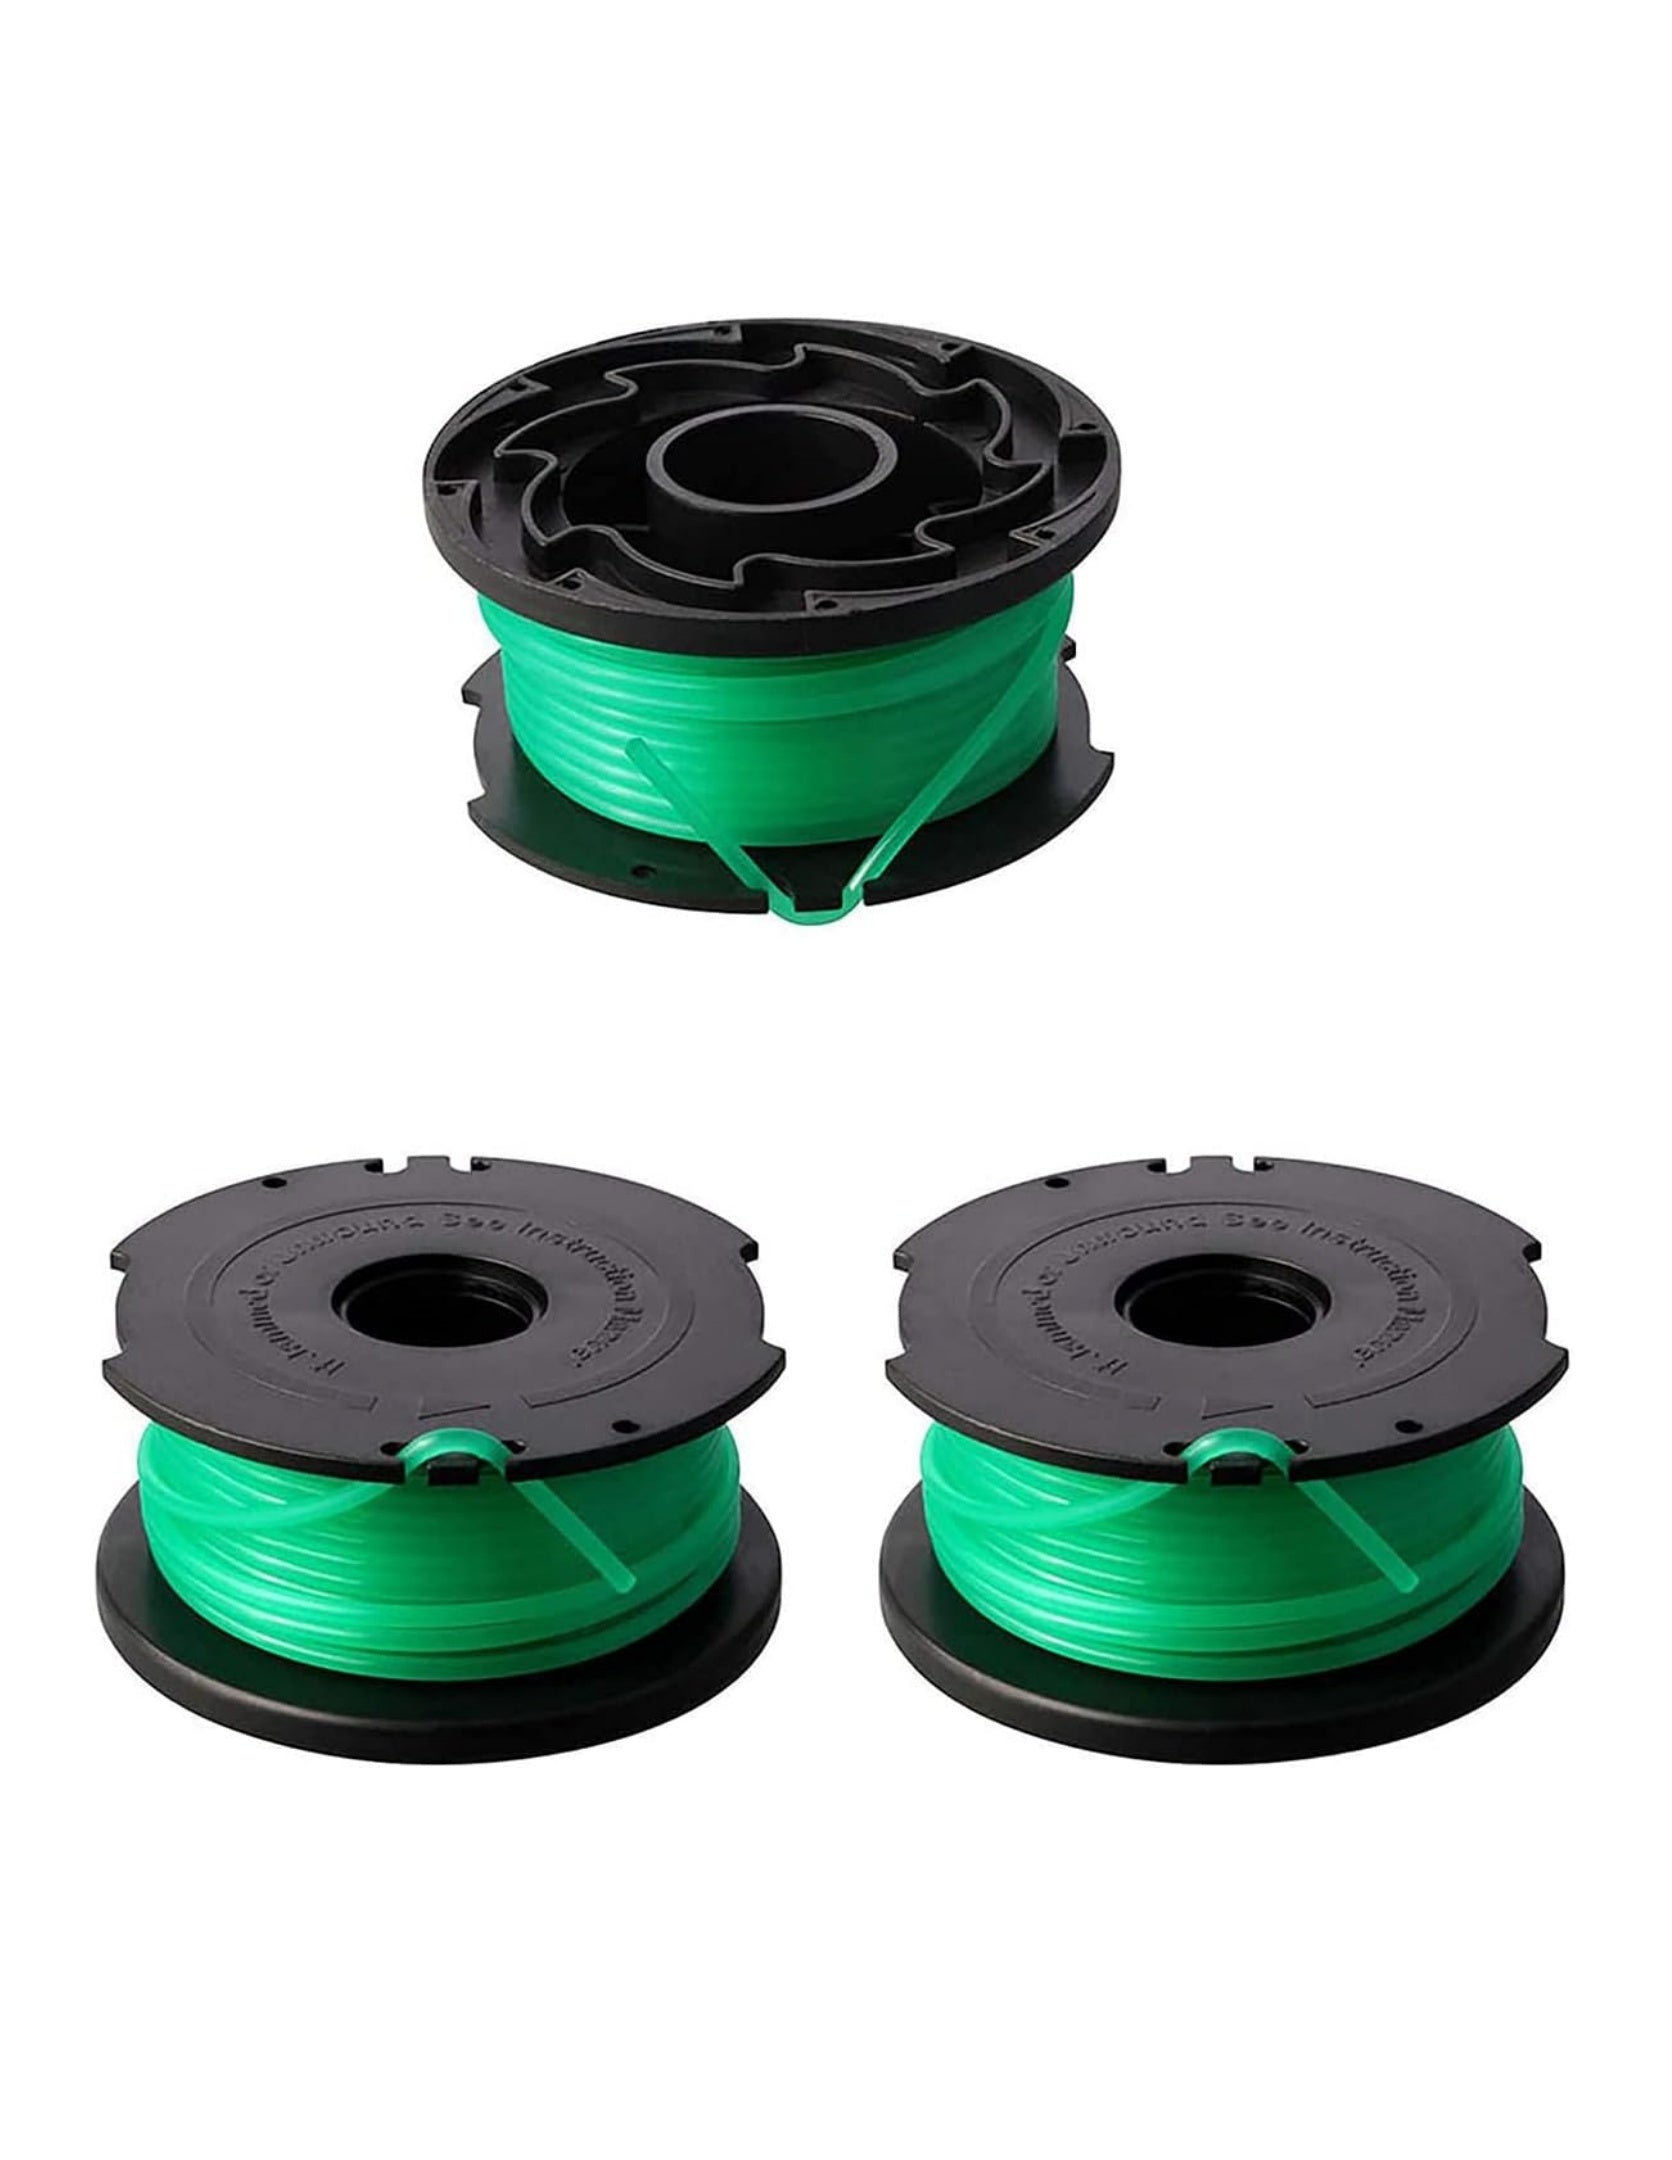 THTEN SF-080 String Trimmer Spool Line Compatible with Black and Decker SF-080-BKP 20ft 0.080" GH3000 LST540 GH3000R LST540B Weed Eater Auto Feed Single Line with 90583594 Cap Covers Parts